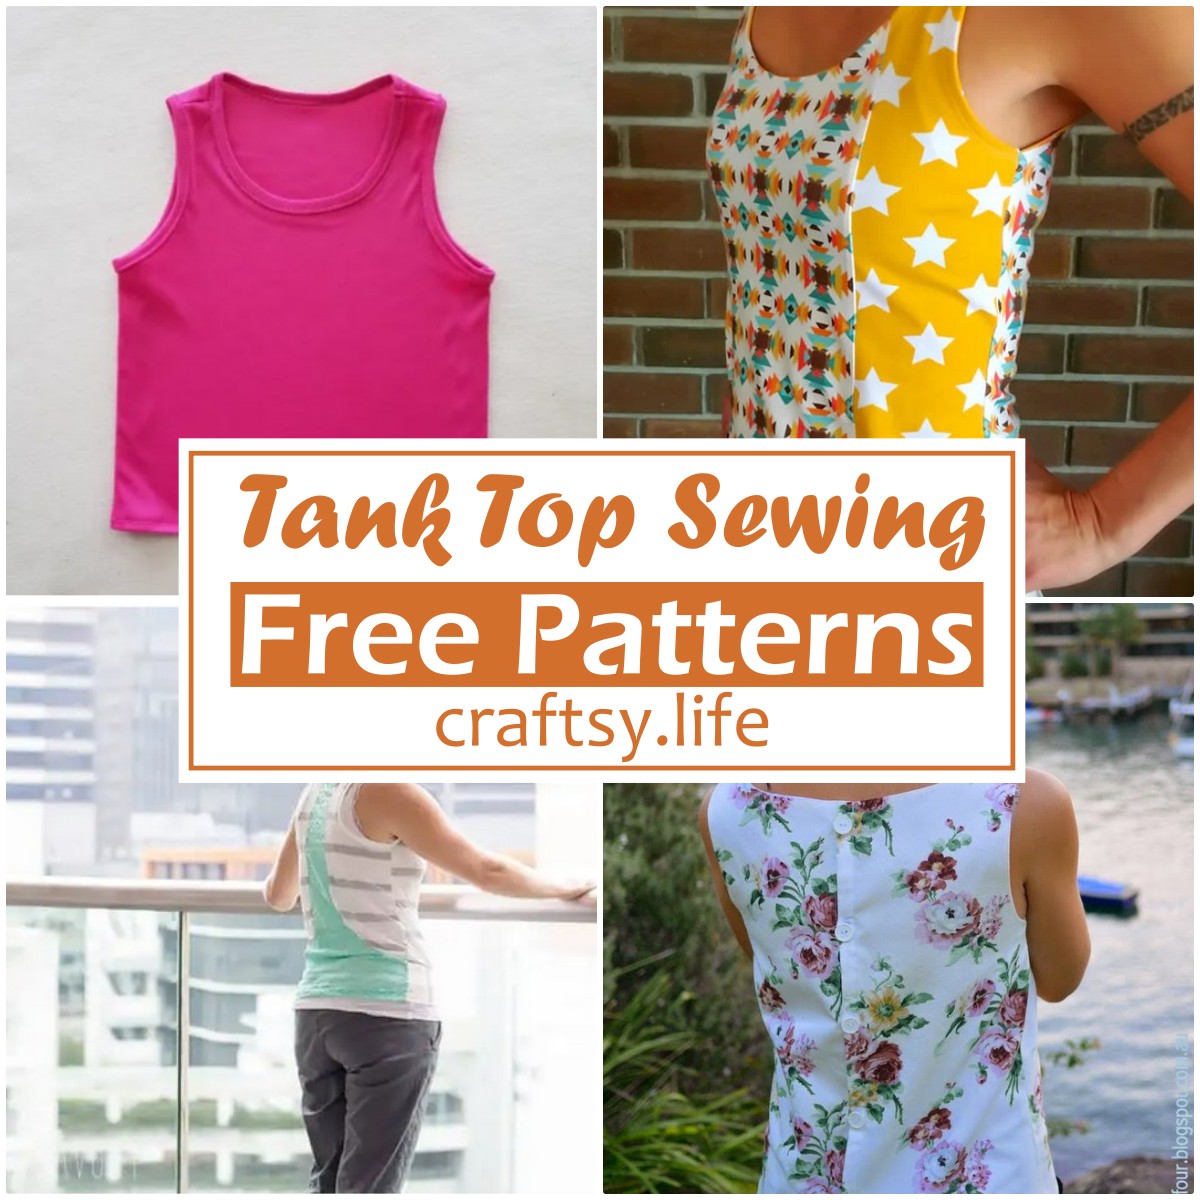 8 Free Tank Top Sewing Patterns - Craftsy